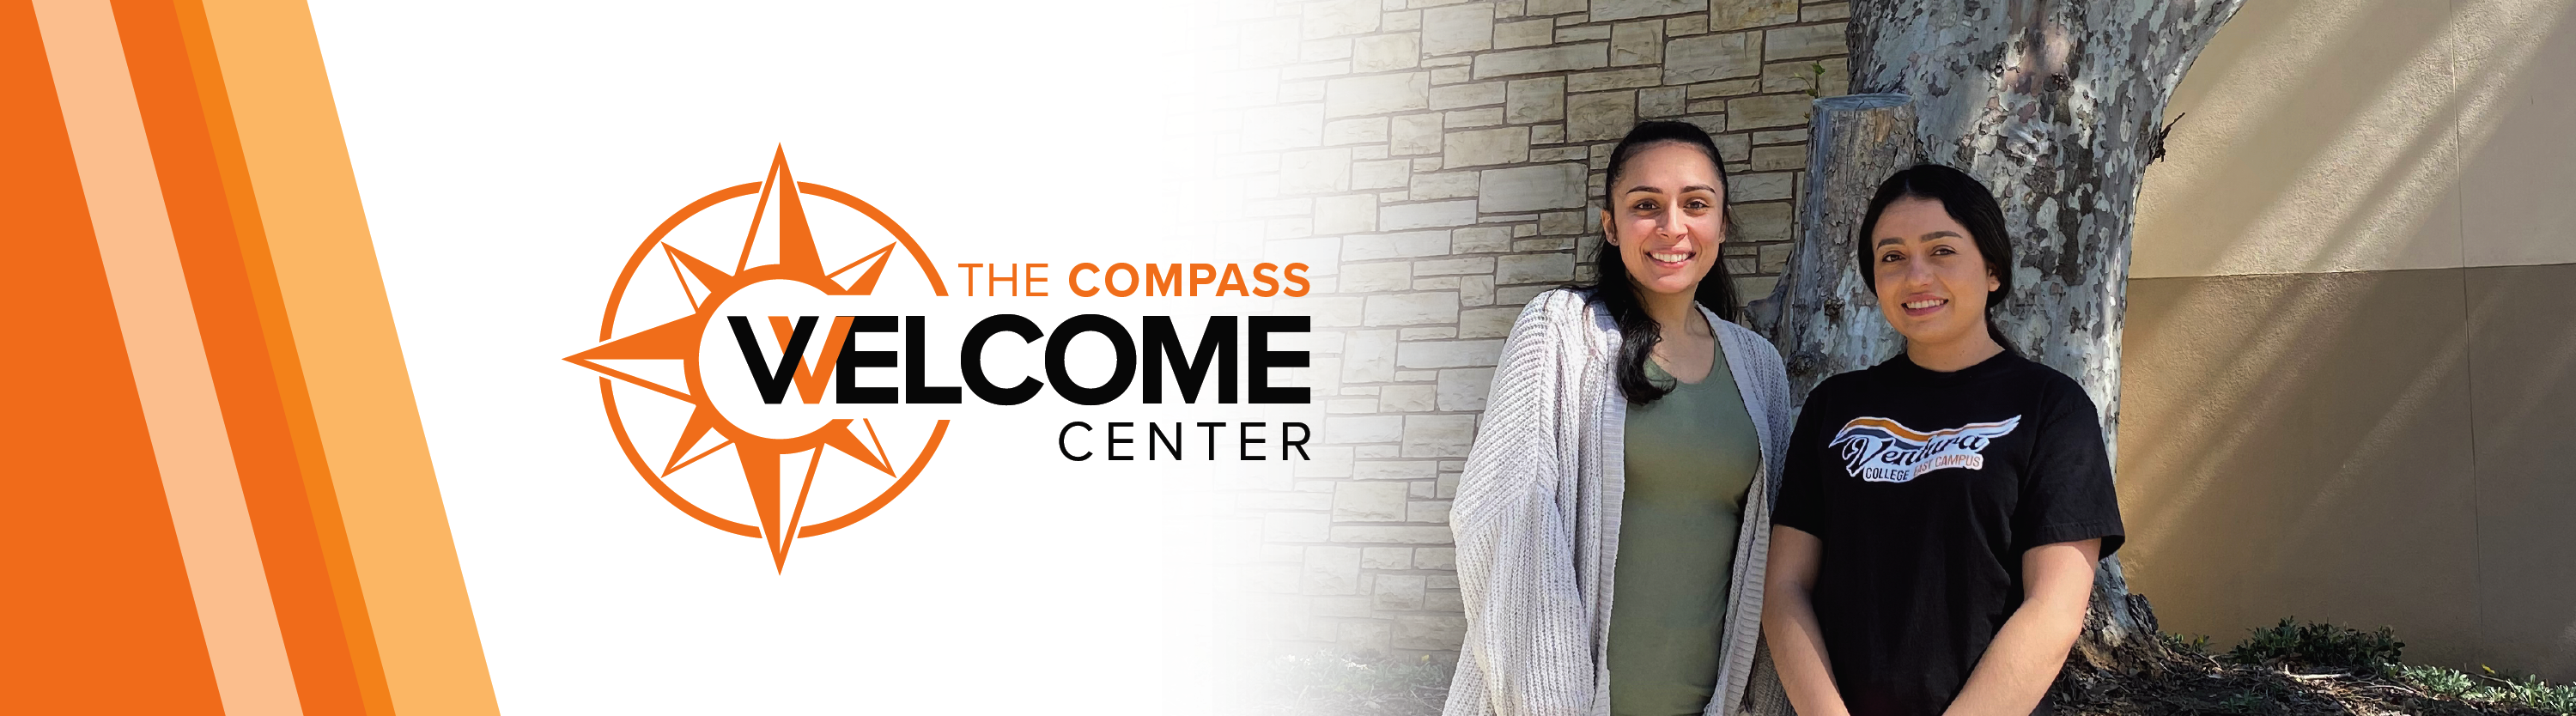 the compass welcome center with photo of two girls standing by a tree